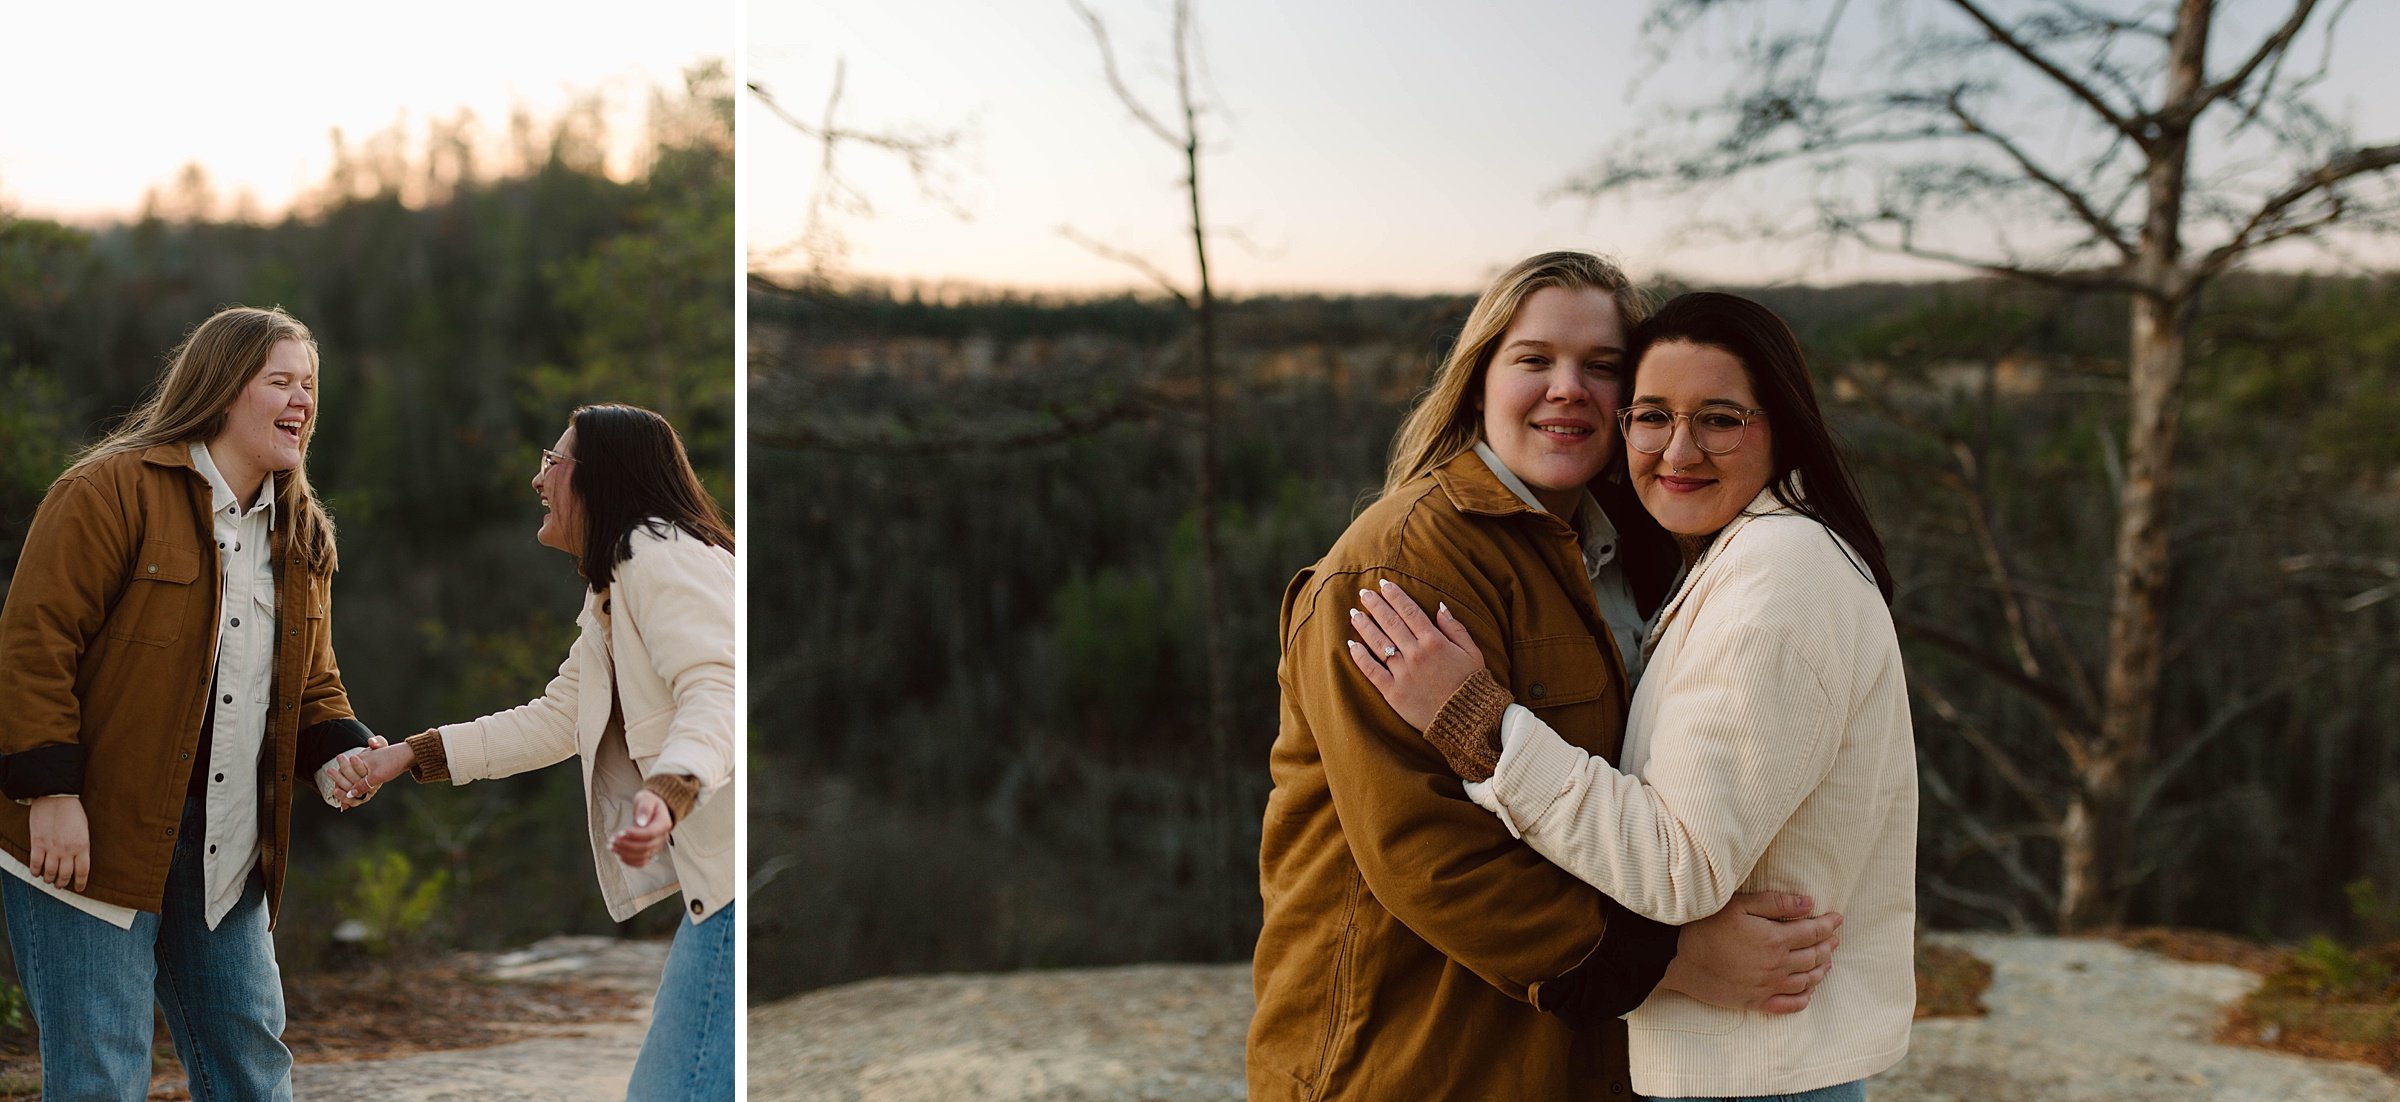 Late Autumn Proposal & Engagement Session in Red River Gorge- Kentucky162.jpg